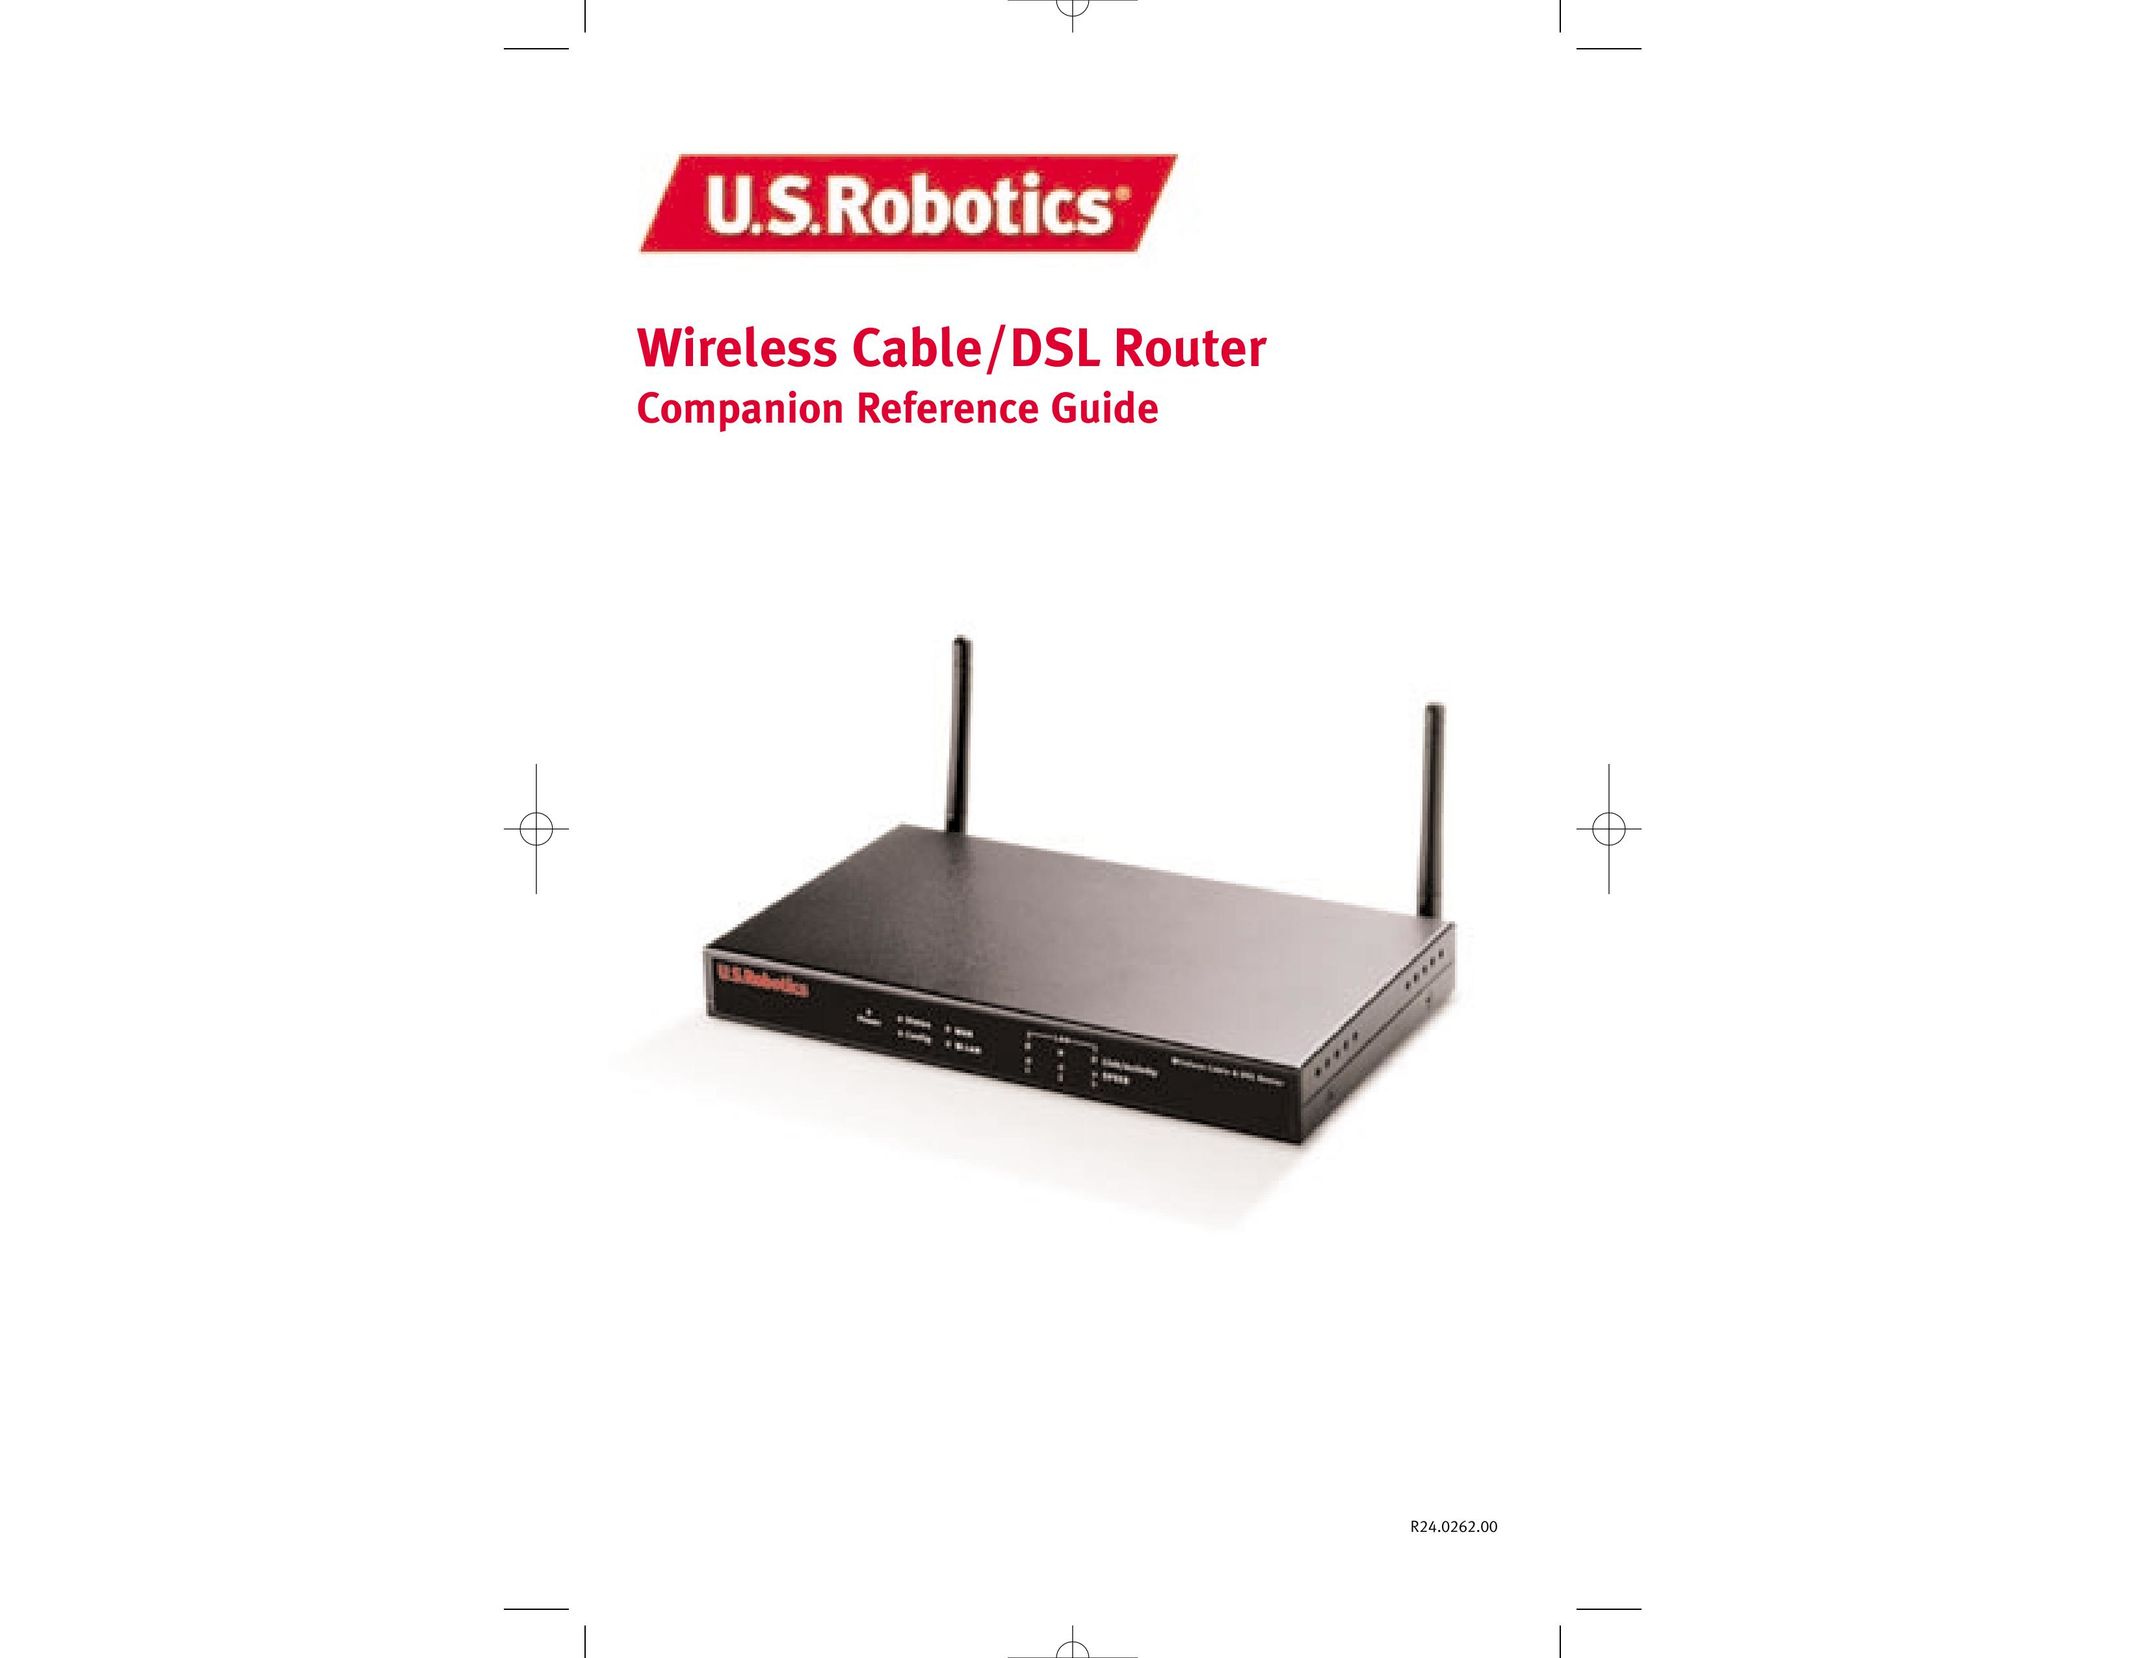 USRobotics Wireless Cable/DSL Router Network Router User Manual